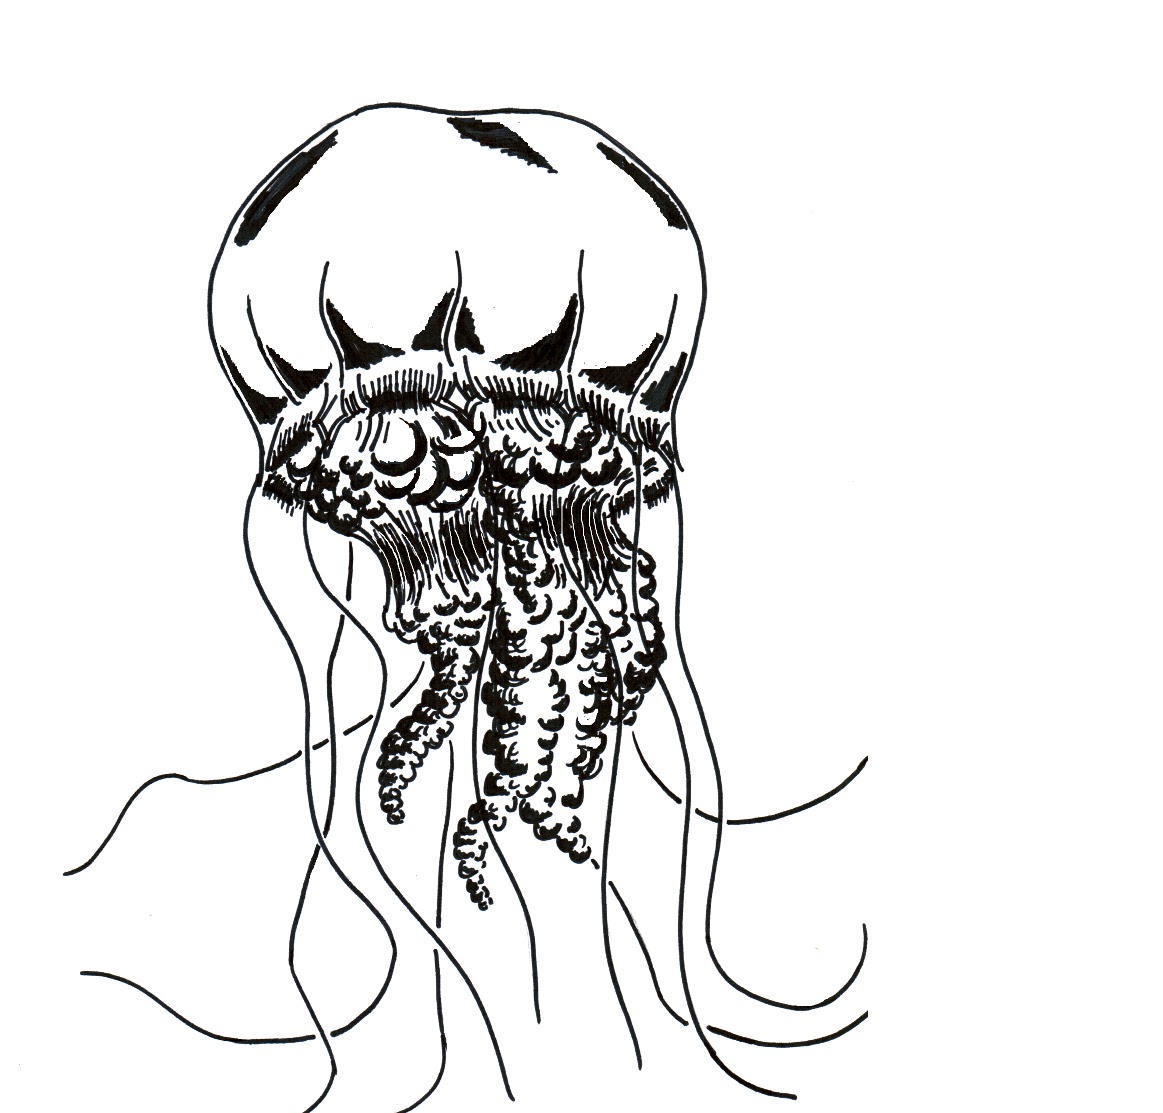 Jellyfish Drawing - ClipArt Best